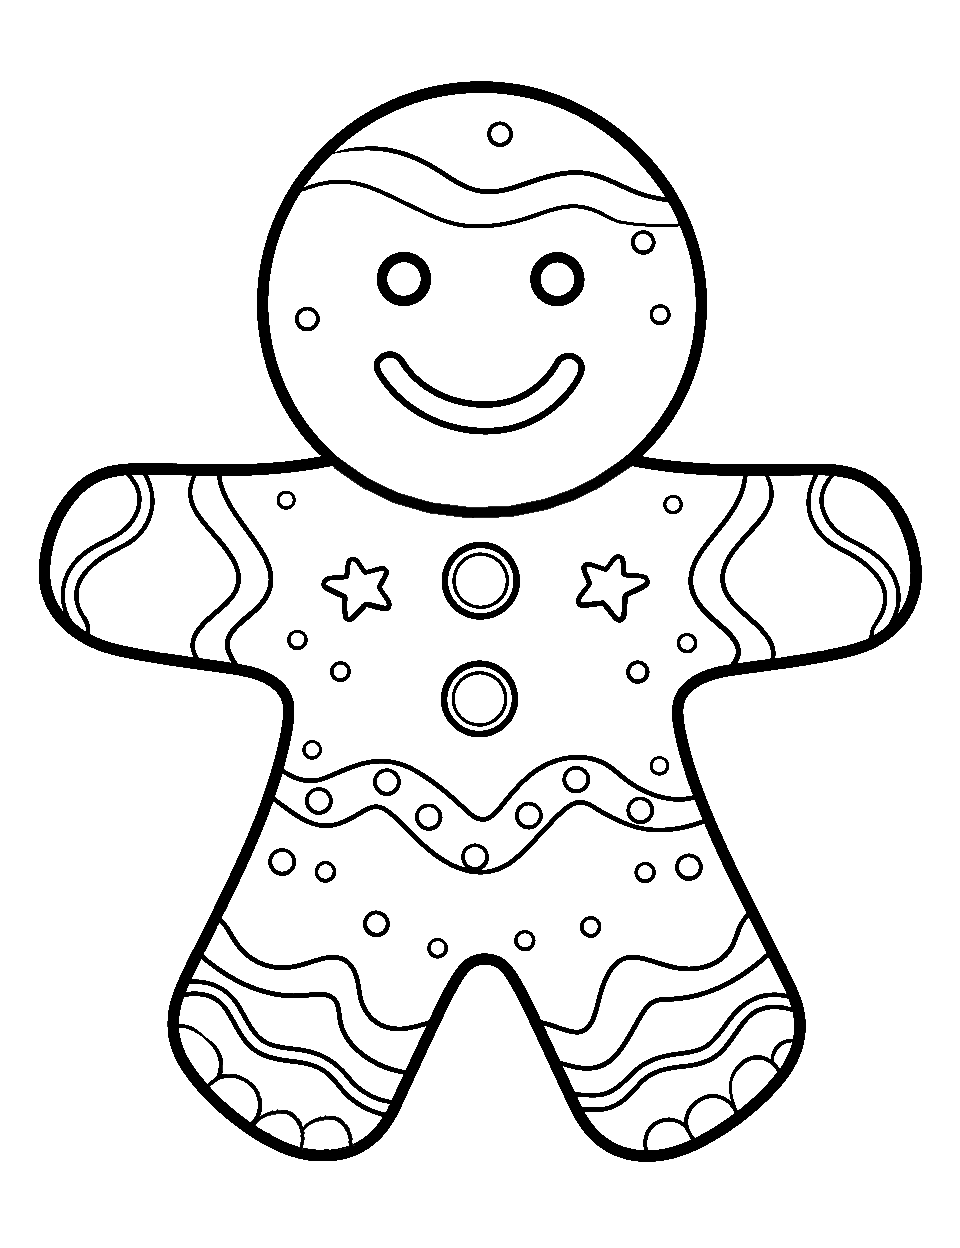 Christmas Gingerbread Food Coloring Page - A gingerbread man with candy buttons and icing details.